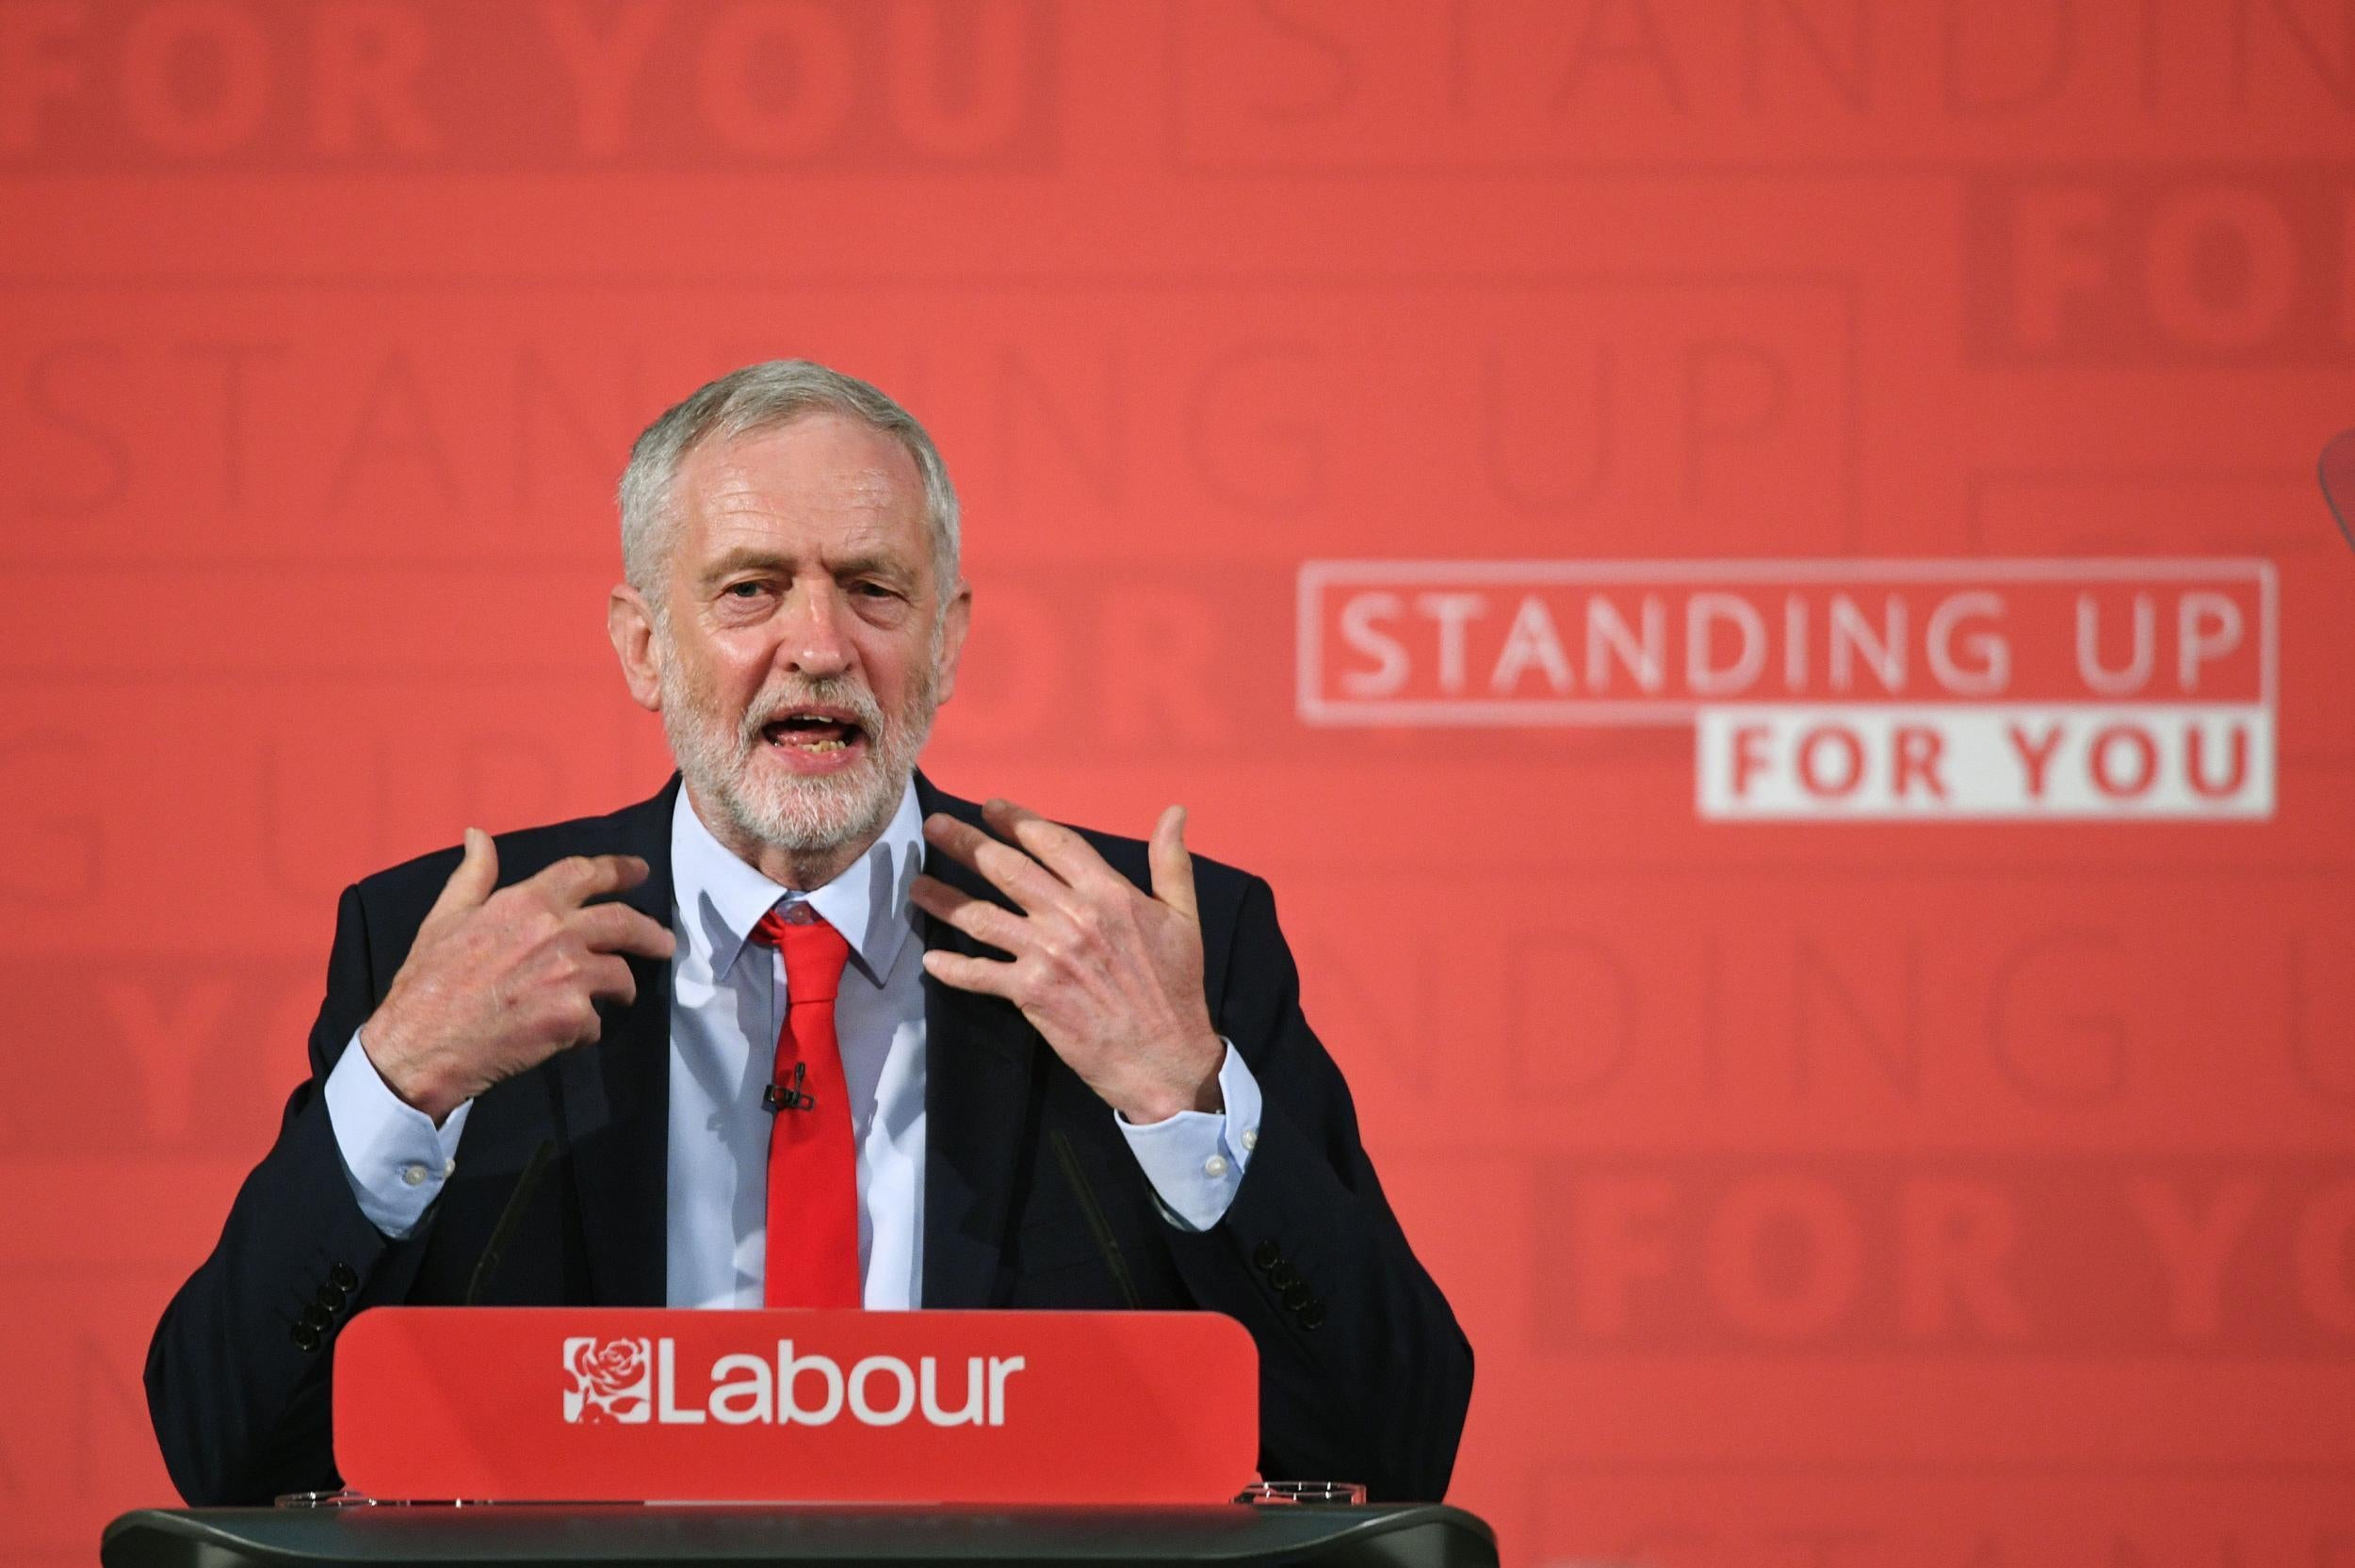 For heavens sake Corbyn, attack, attack and counter-attack your critics